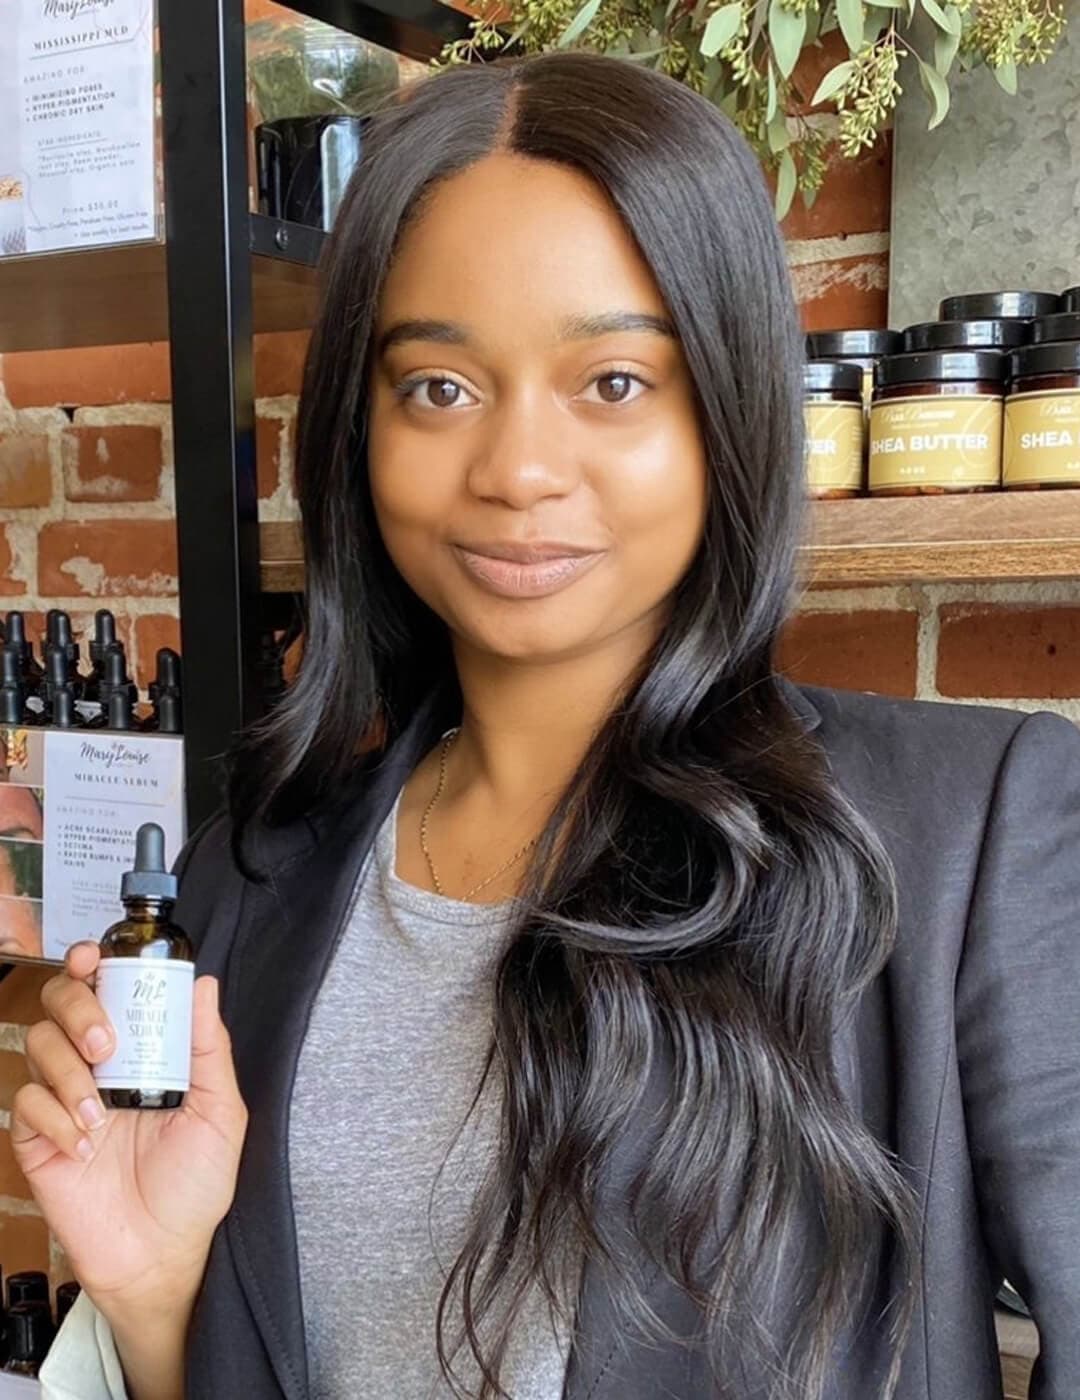 MARY LOUISE COSMETICS founder Akilah Mary-Louise Releford posing and holding a bottle of skincare product